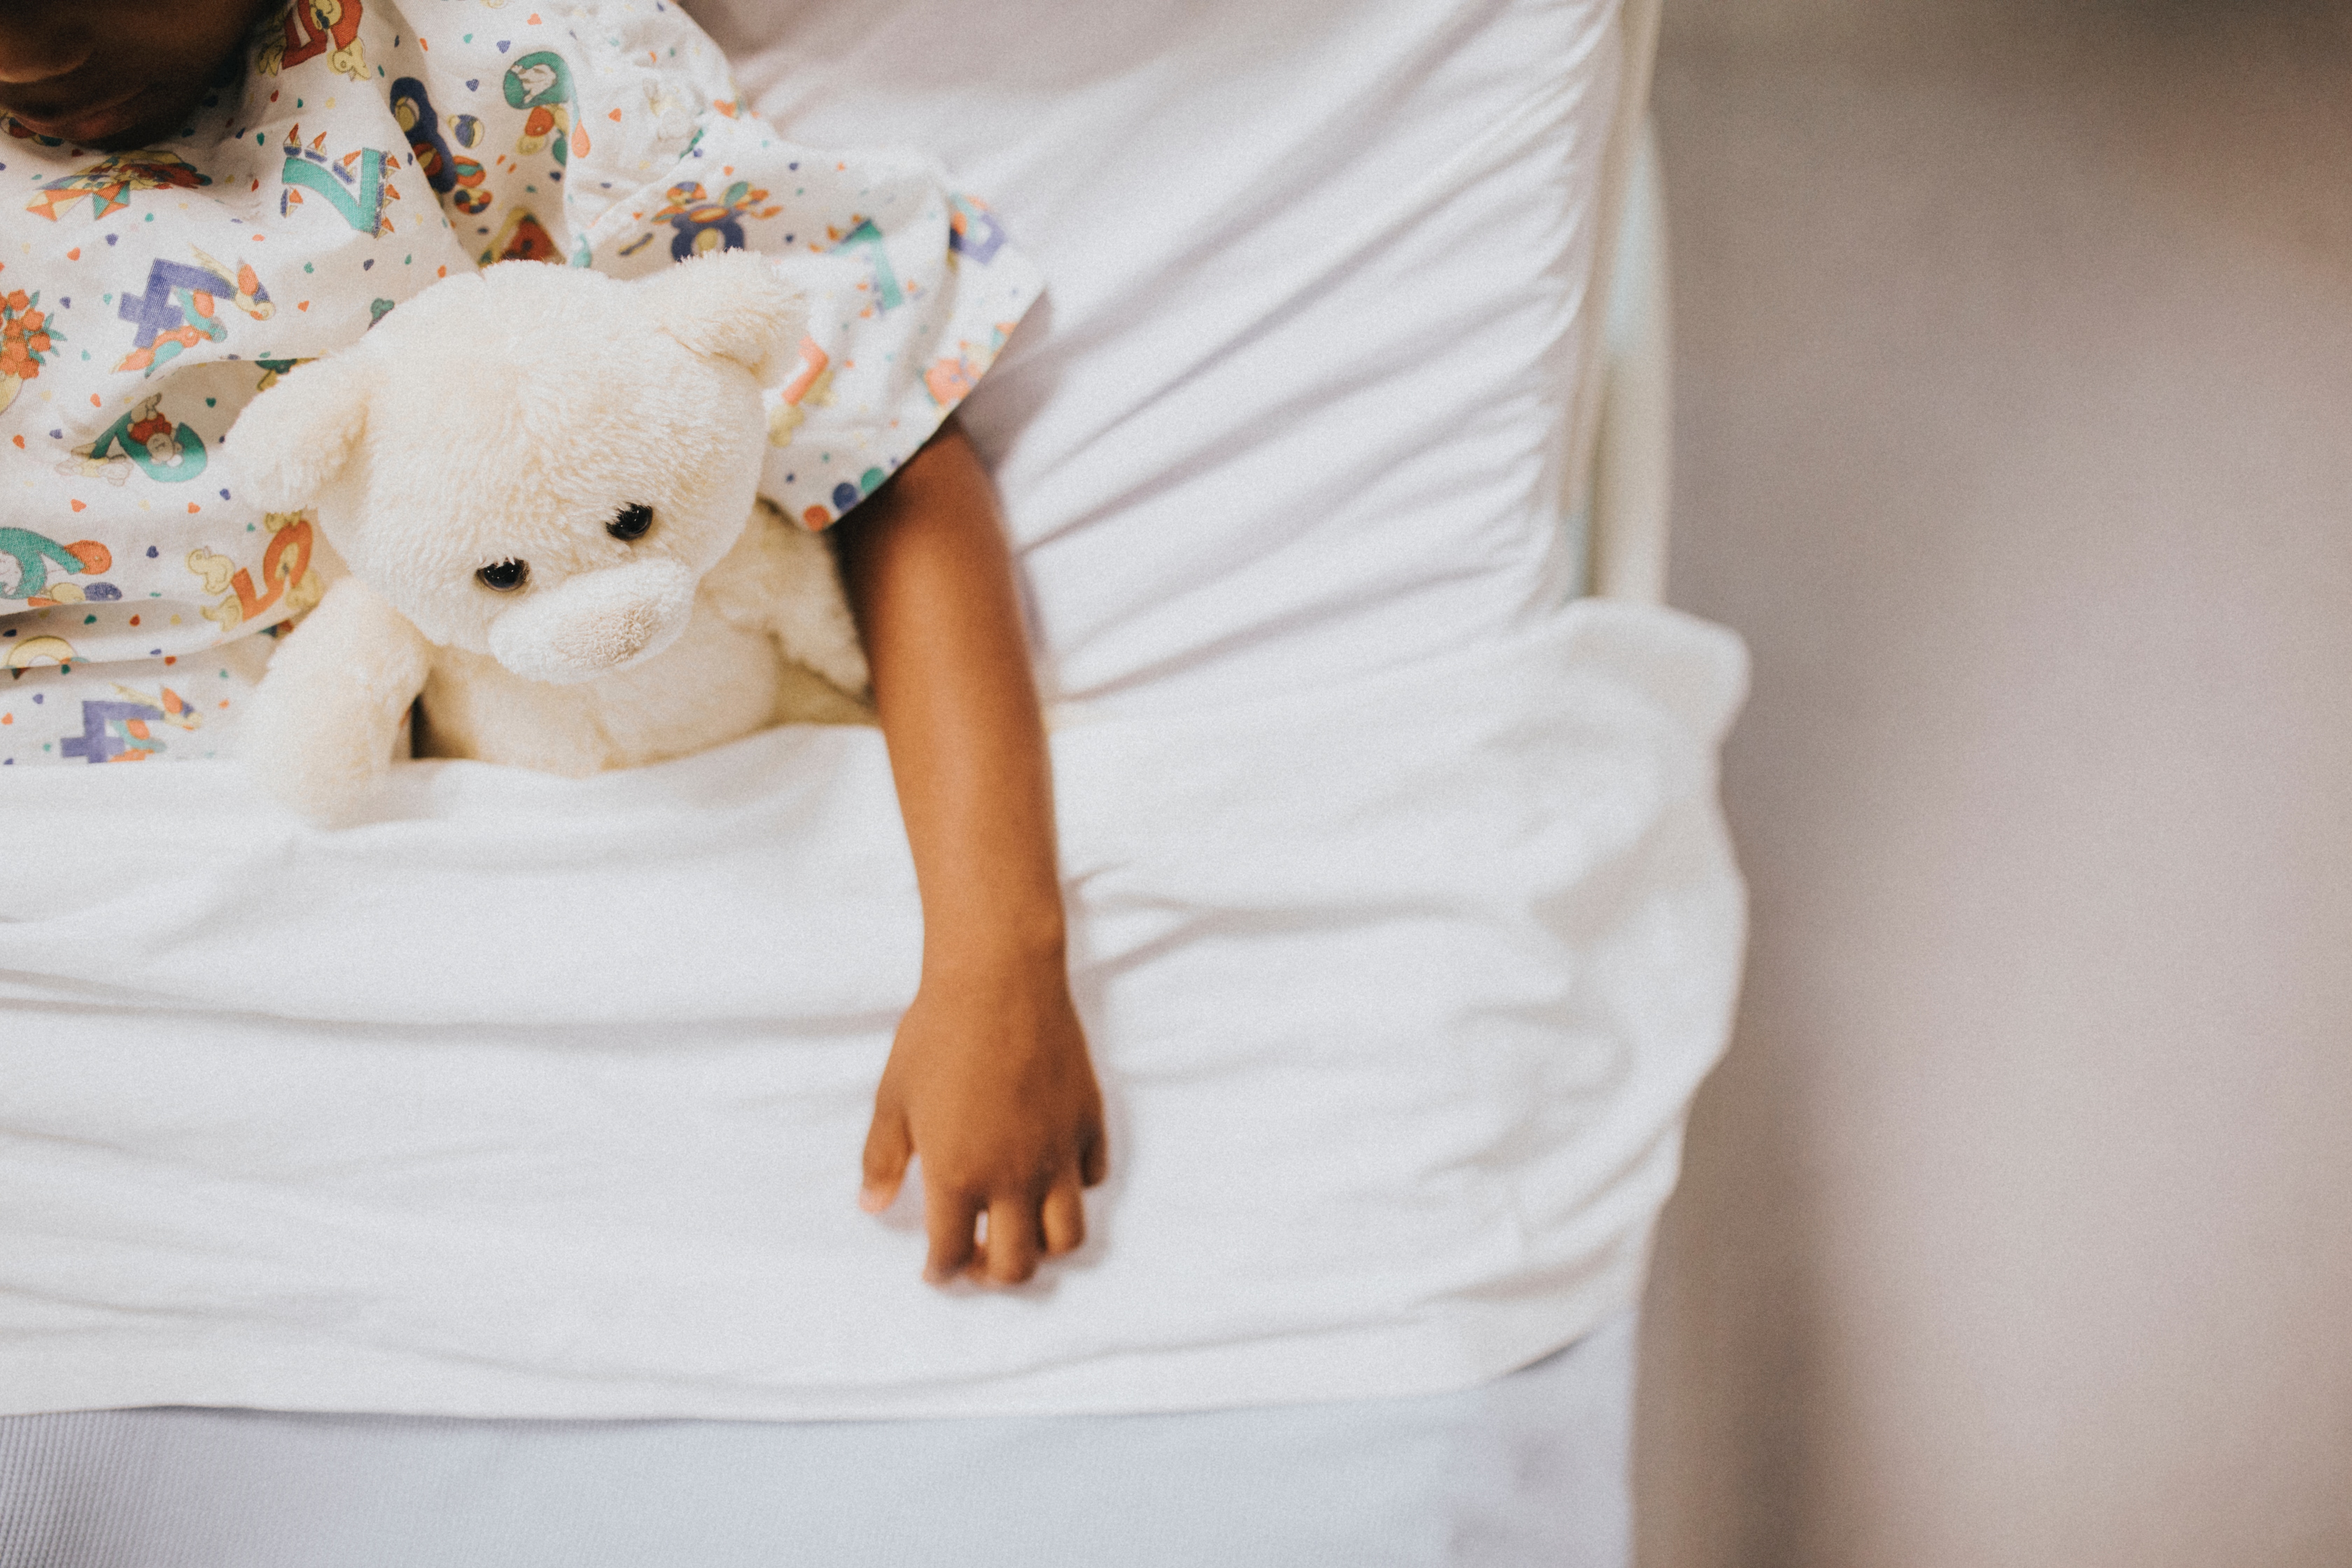 Managing Childrens' Pain After Surgery - PMIR